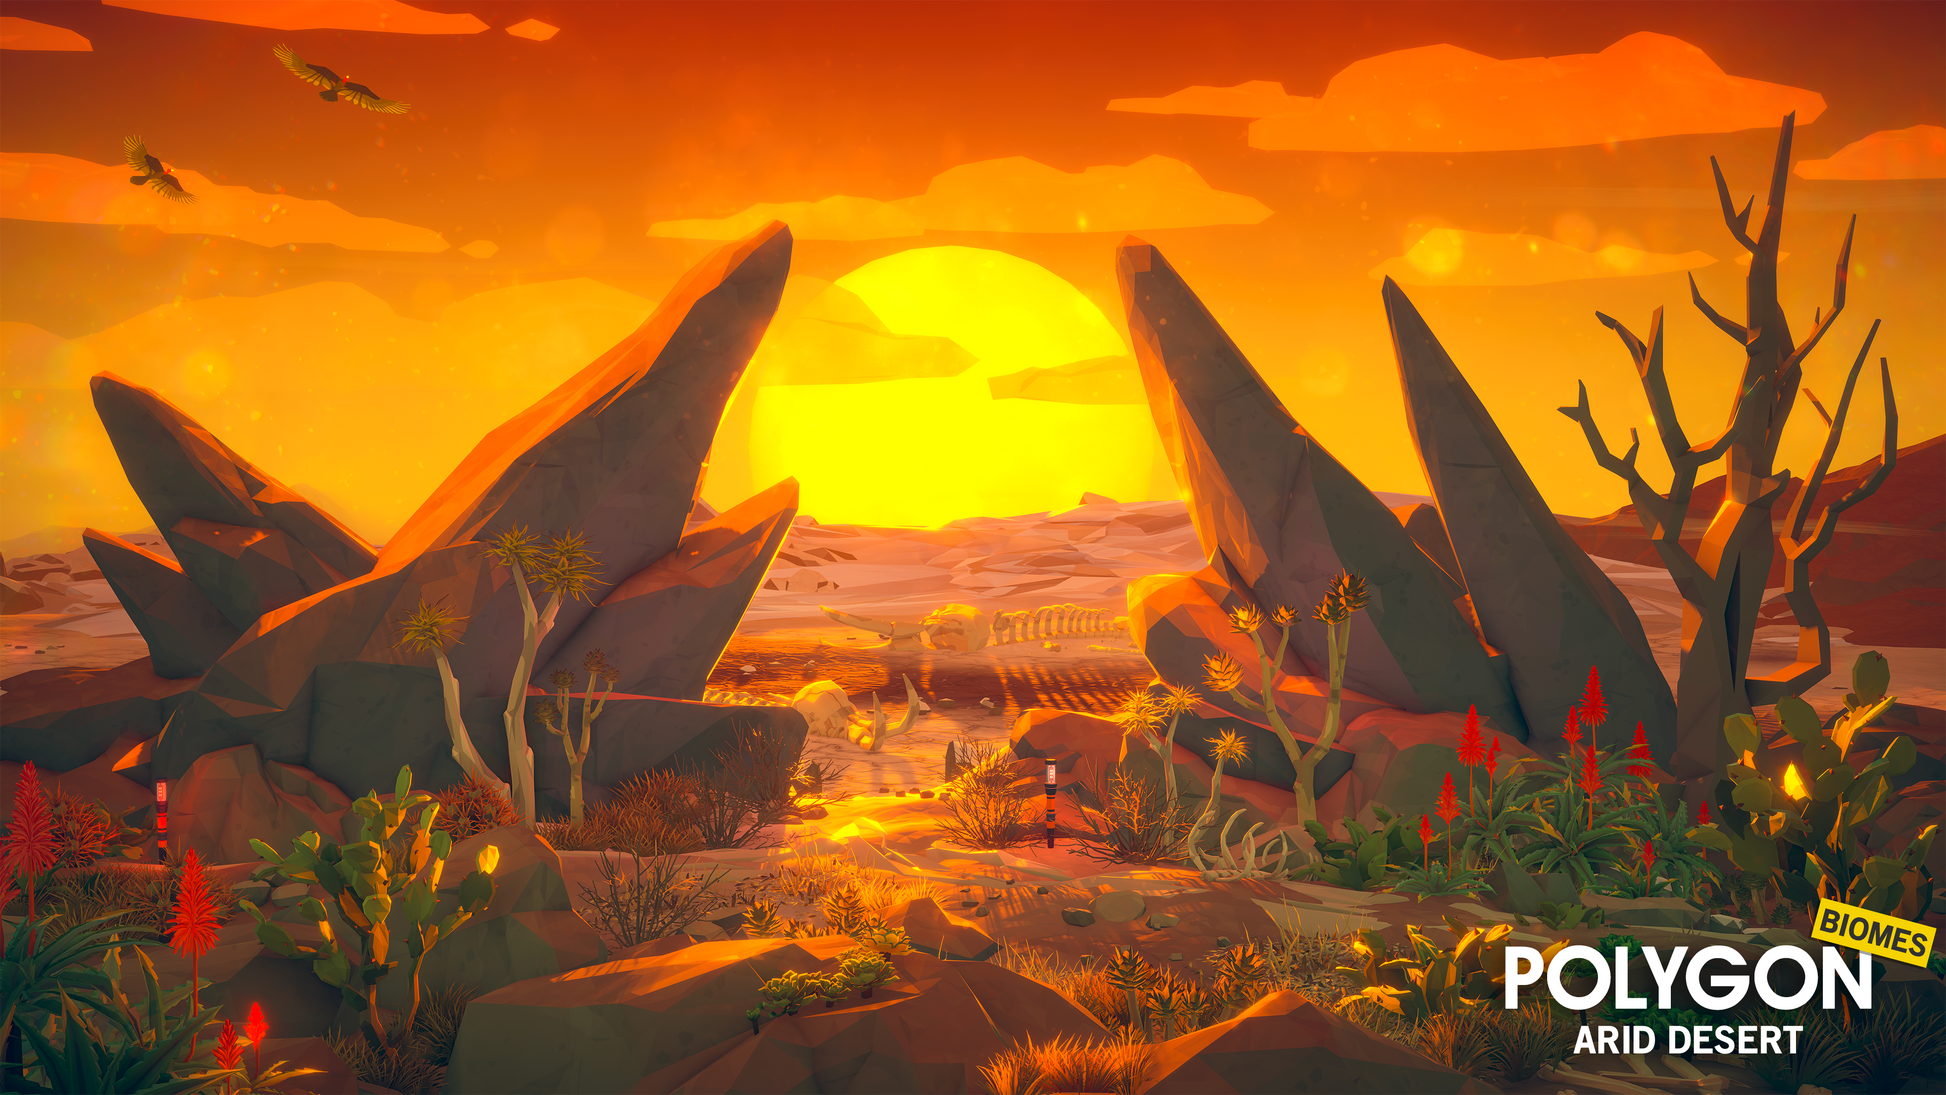 Sunset map design in the desert built with components from the POLYGON arid desert asset pack